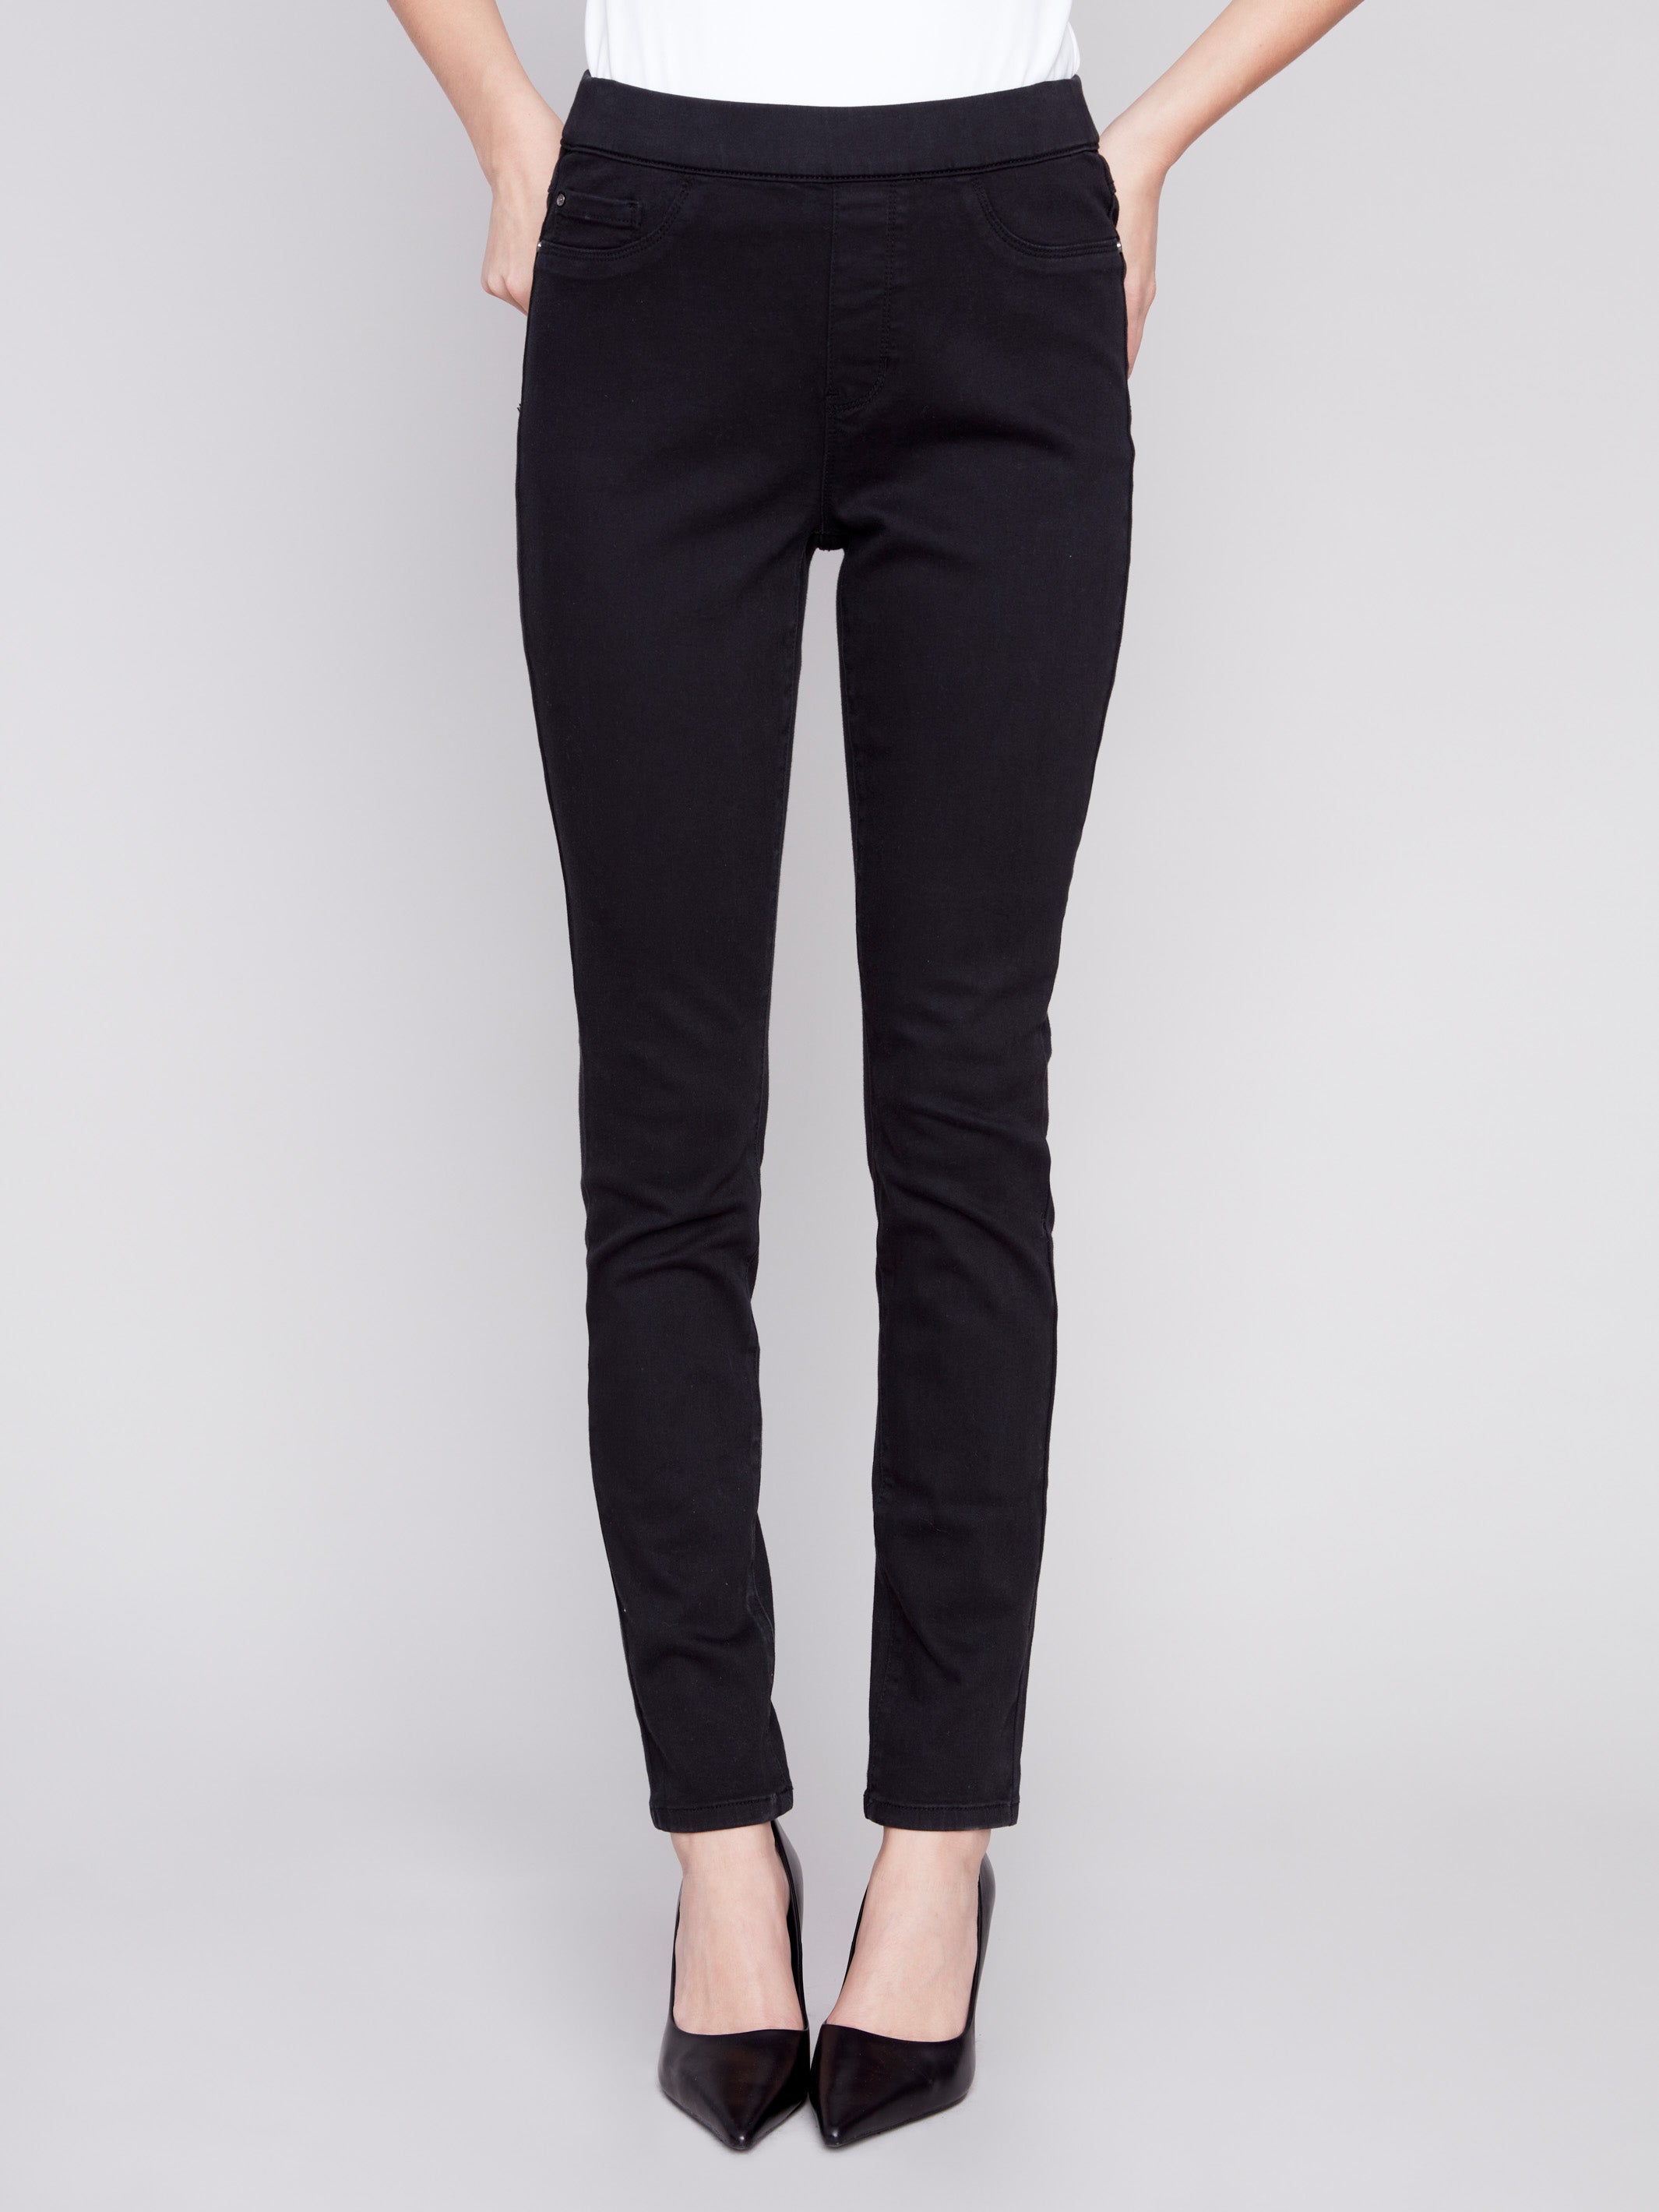 Twill Pull-On Pants - Black - Charlie B Collection Canada - Image 4